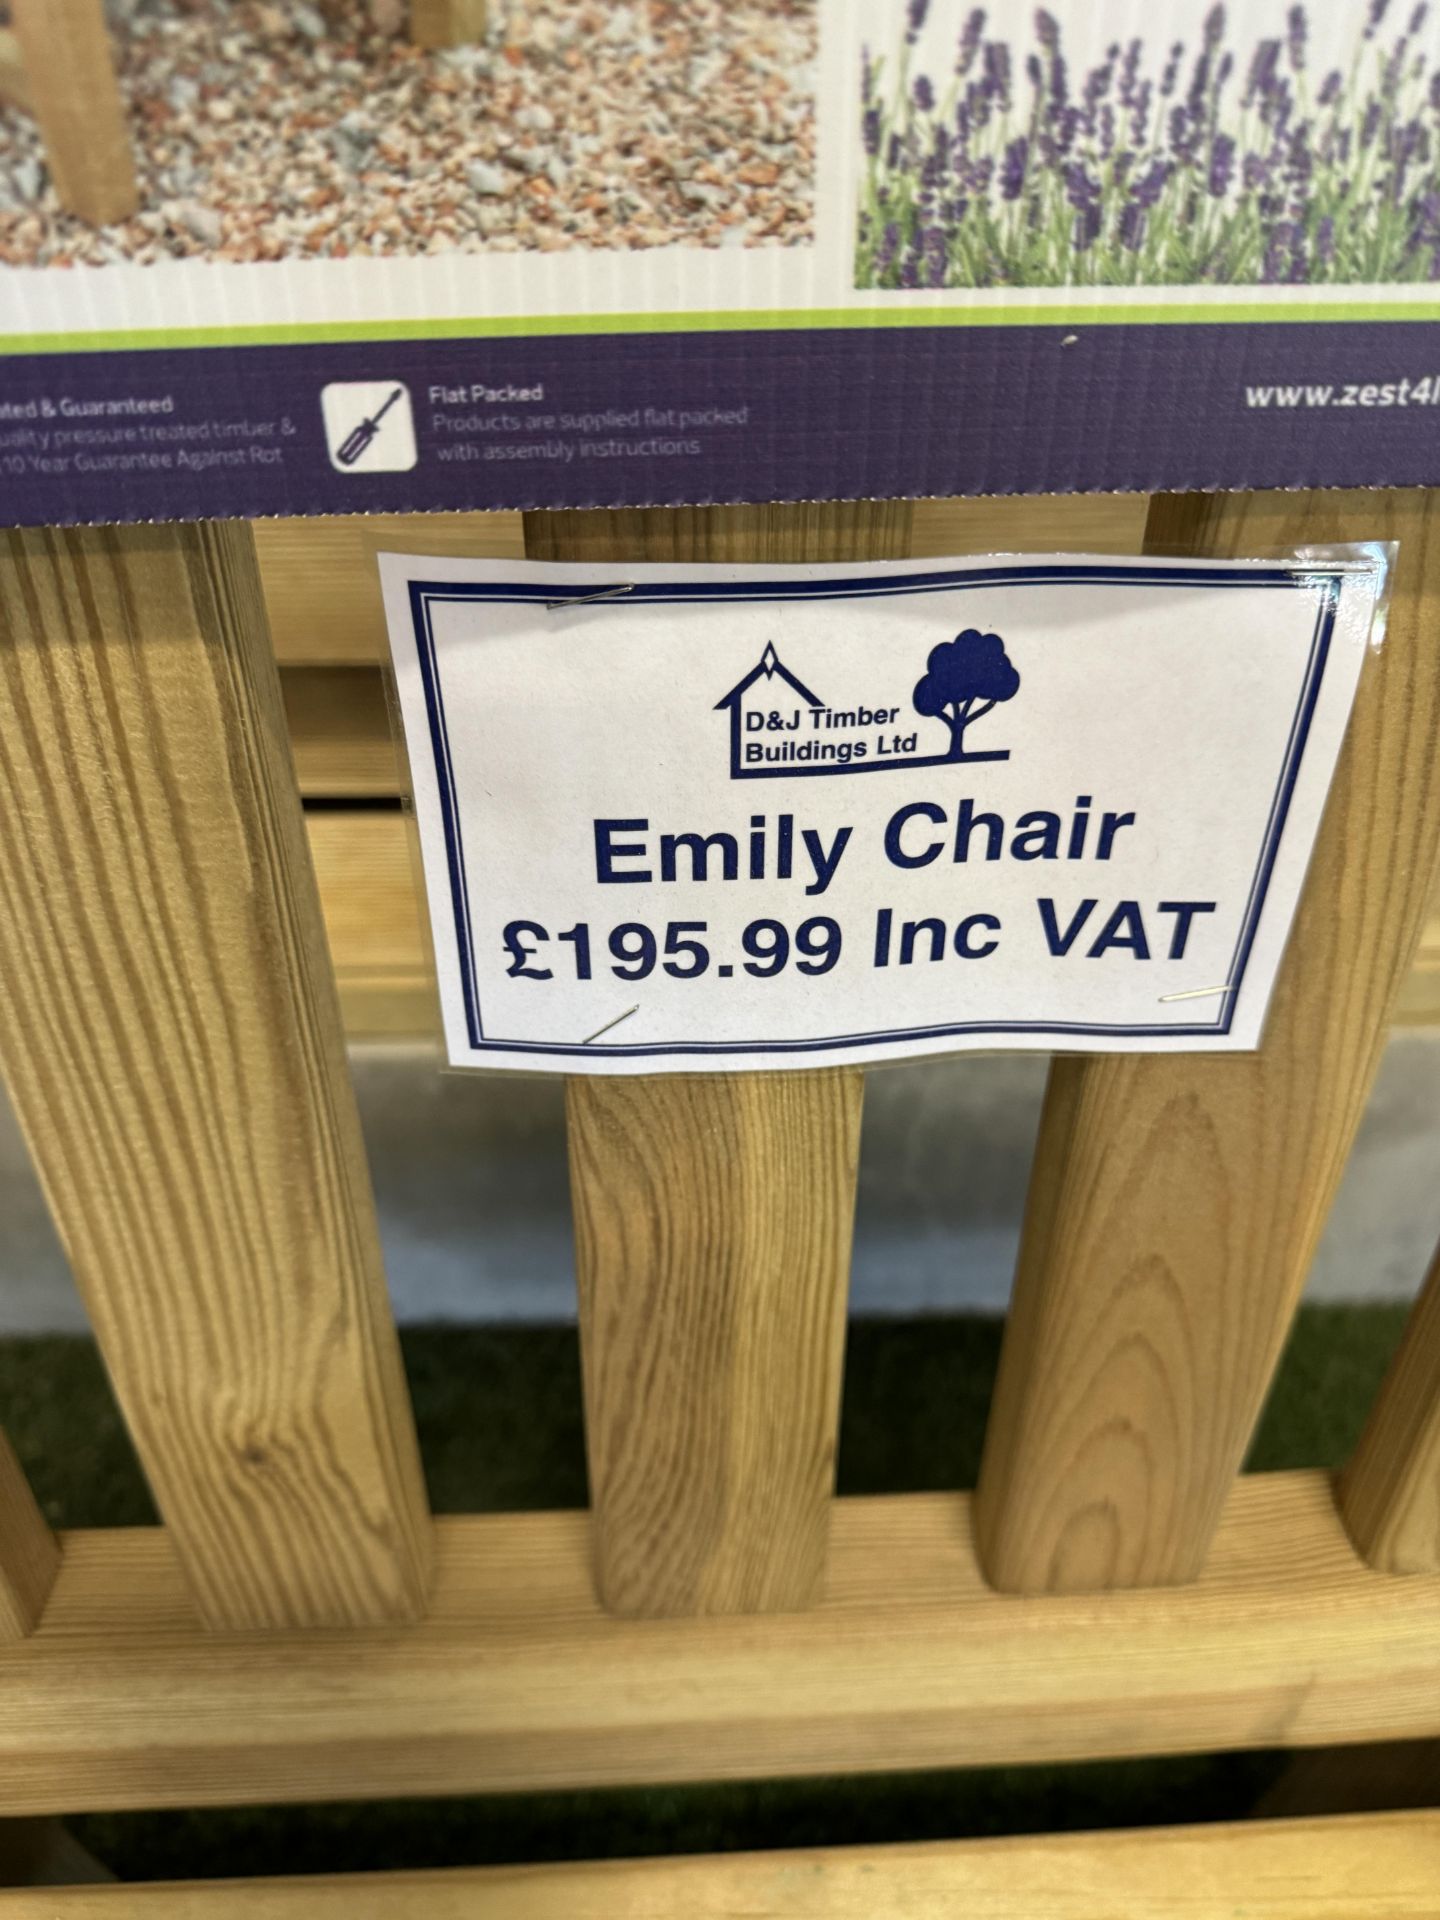 Emily Chair, Sizes (W x D x H) 0.64m x 0.65m x 0.935m RRP £195.99 - Image 5 of 11